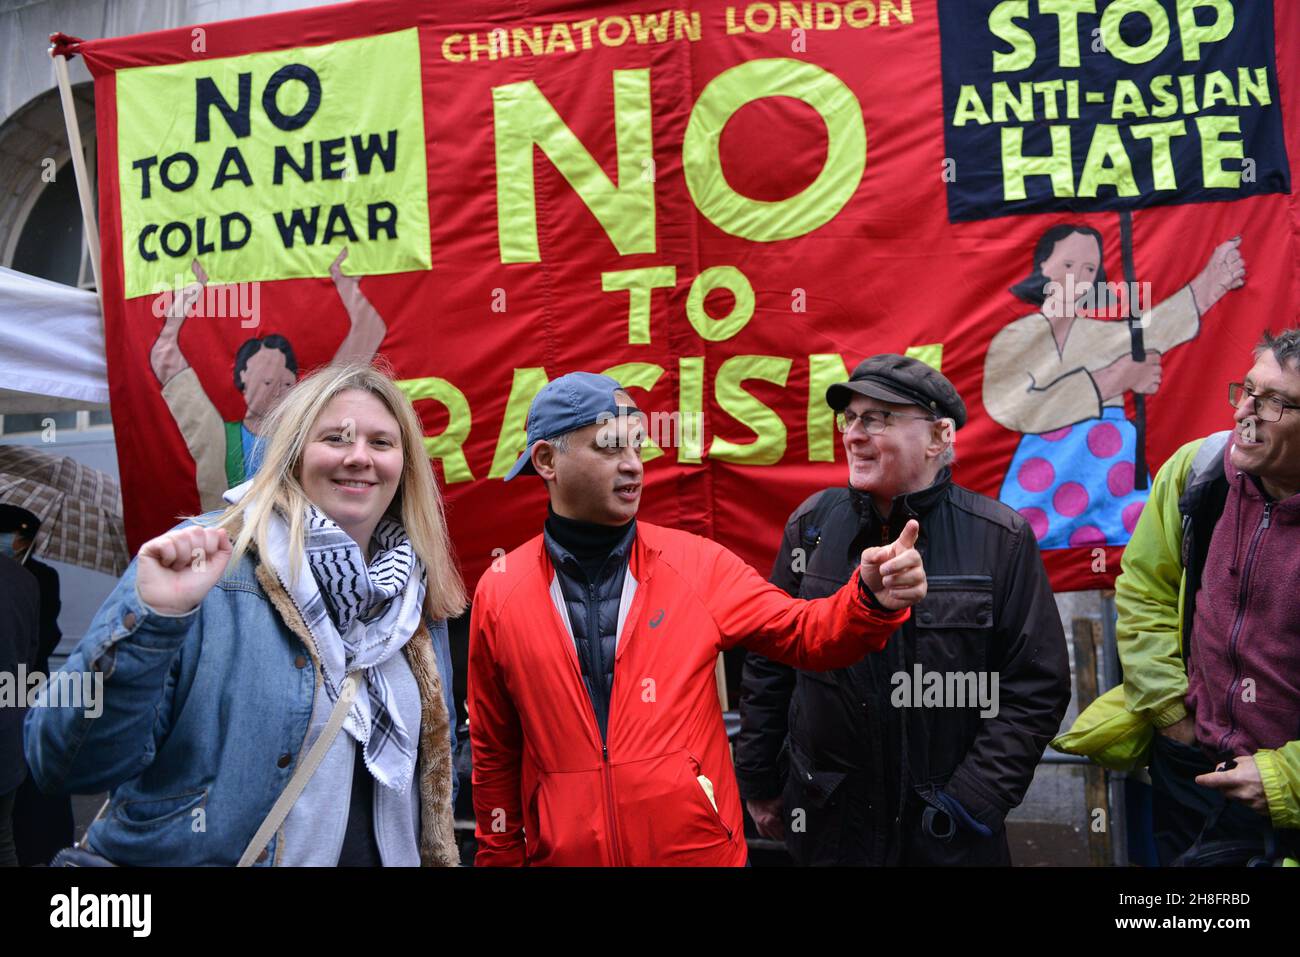 Activists gesture as they take part during the Anti-Asian Hate rally. Dozens of pro democracy, pro Hong Kong independence and anti CCP (Chinese Communist Party) protesters hosted a  counter protest against the Stop Anti-Asian Hate rally 'against the new cold war' organized by the Chinese associations in the UK, in London's Chinatown. Stock Photo